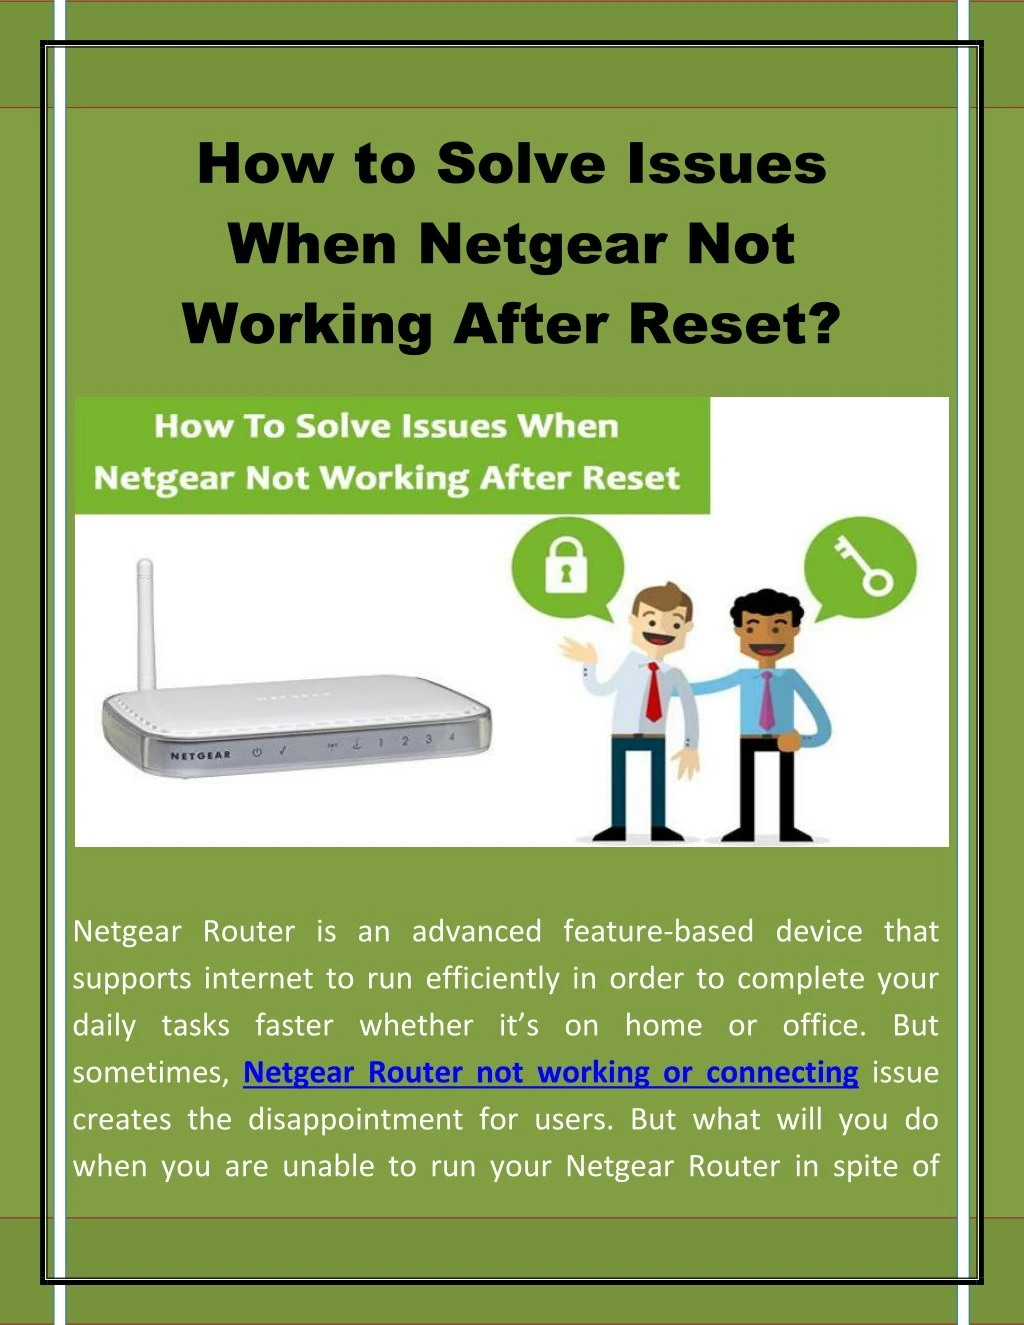 how to solve issues when netgear not working